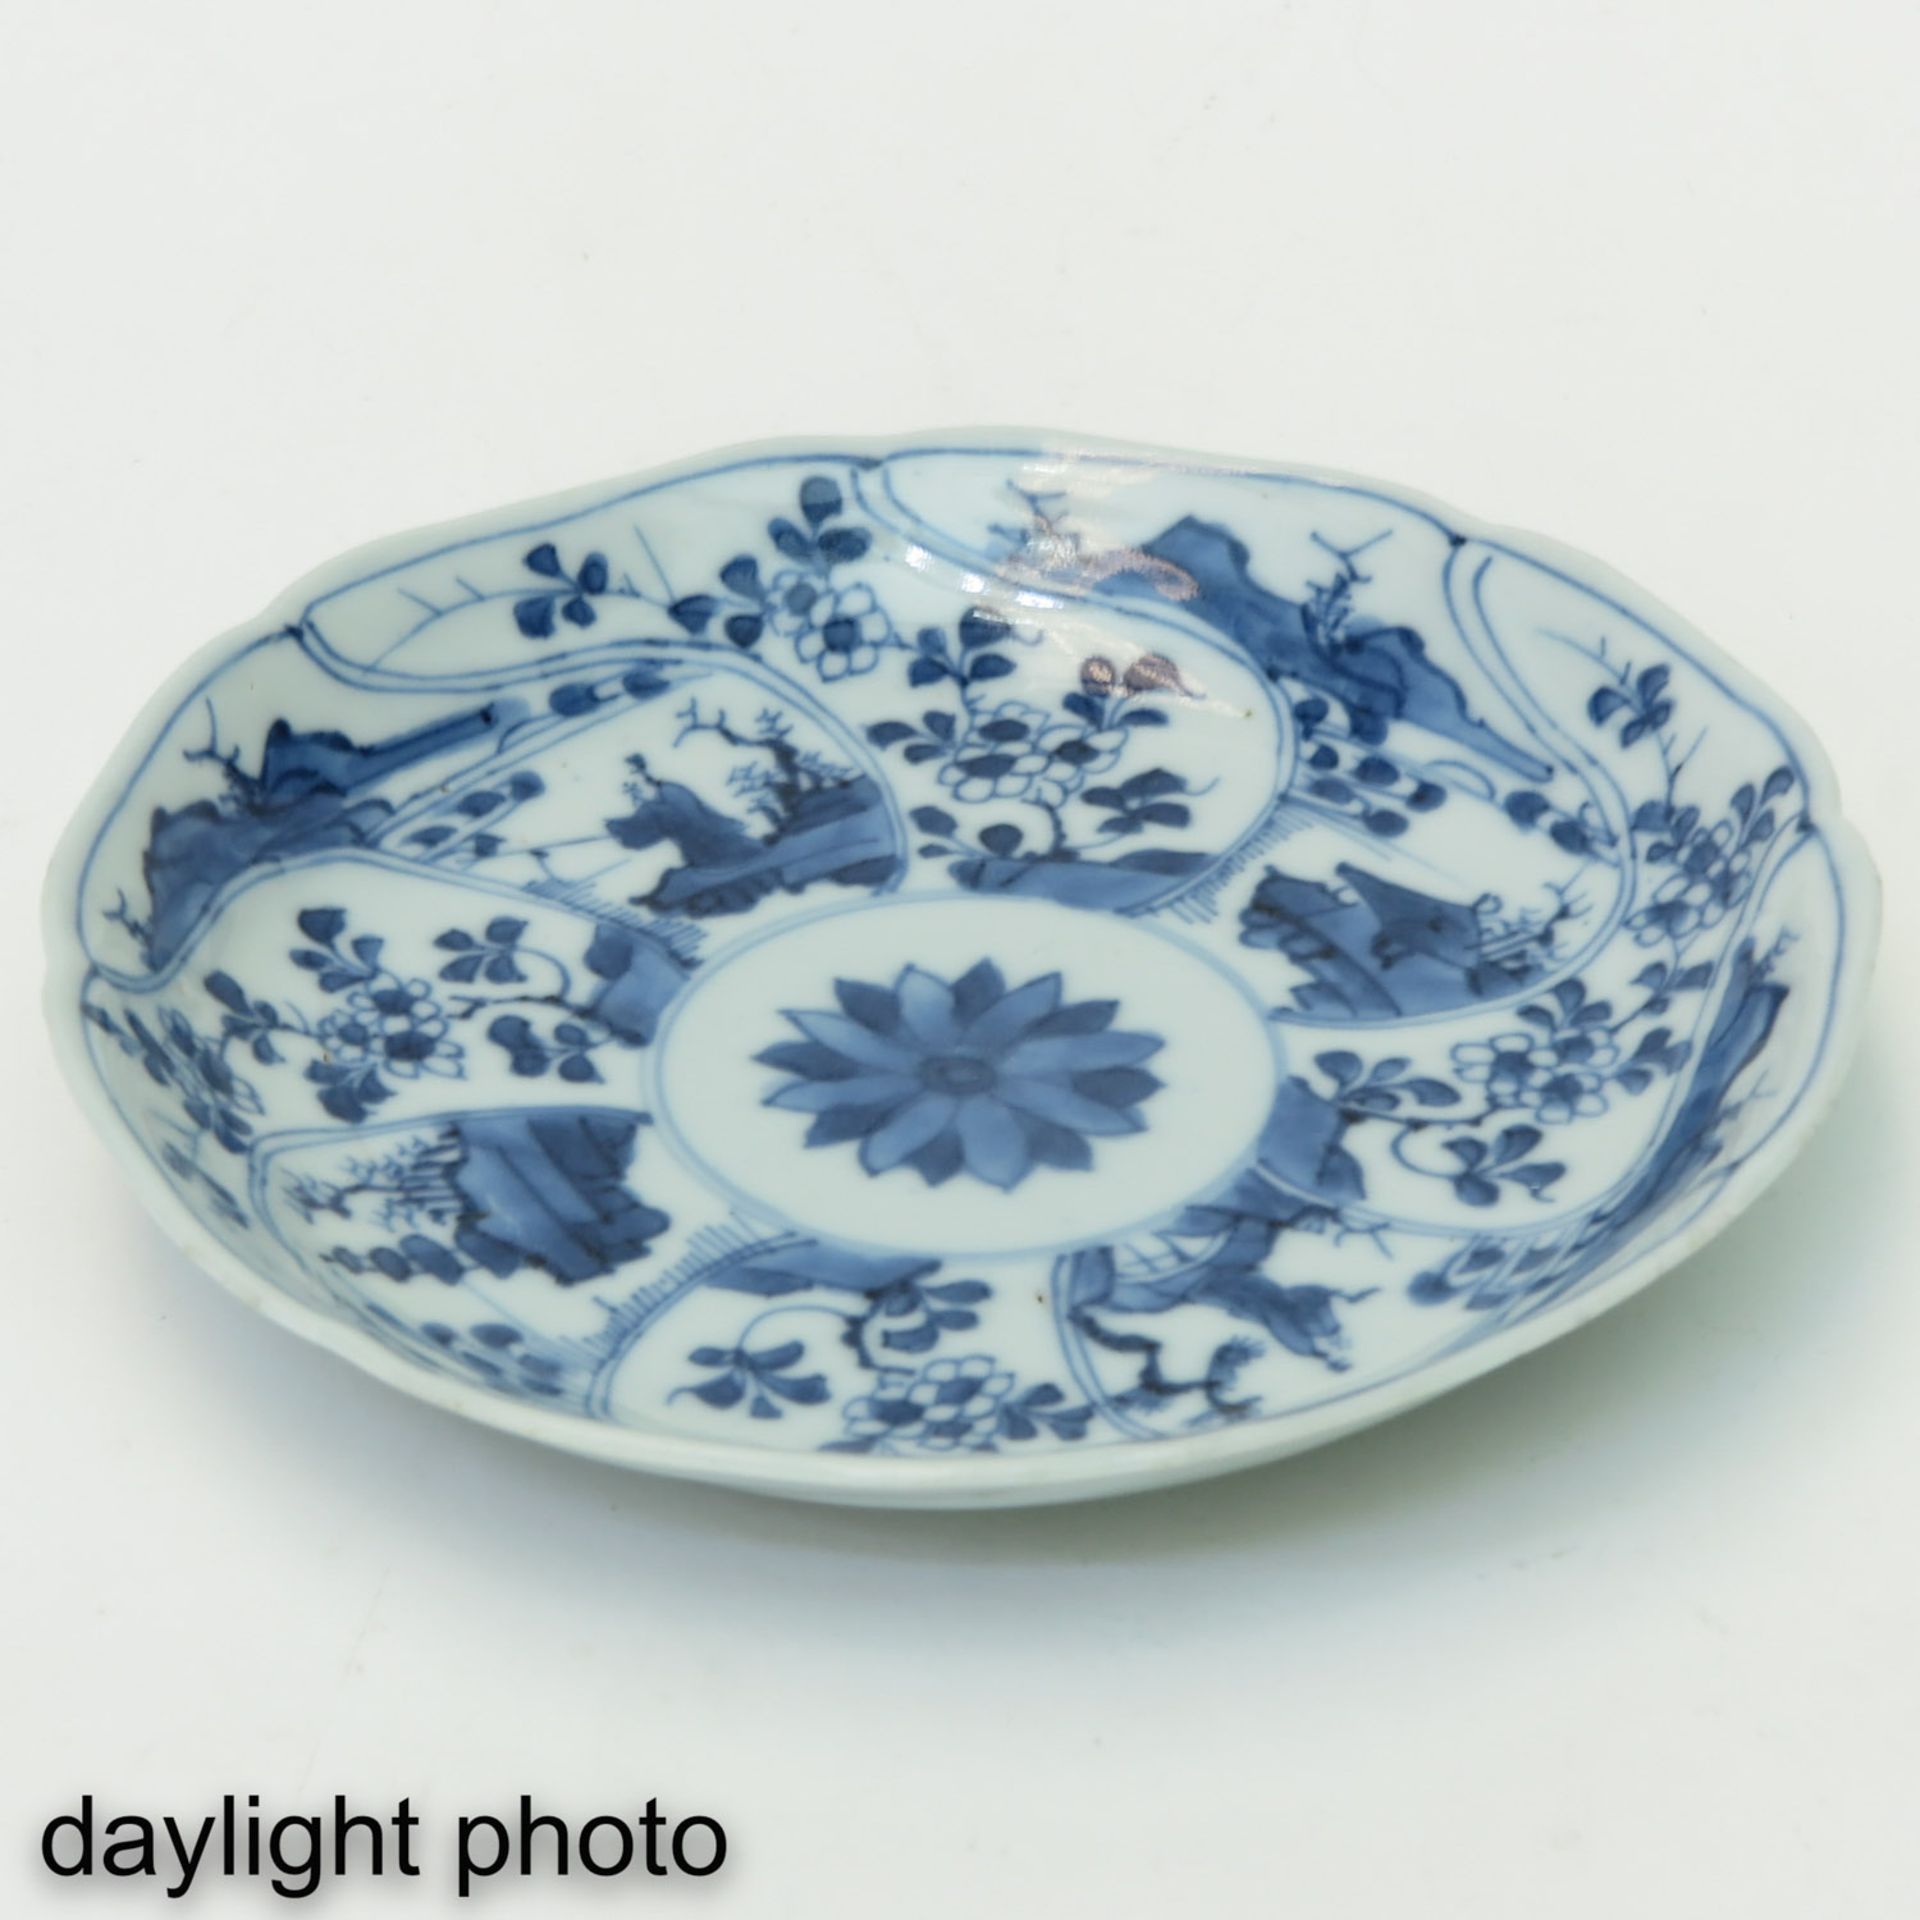 A Series of 6 Blue and White Small Plates - Image 9 of 10